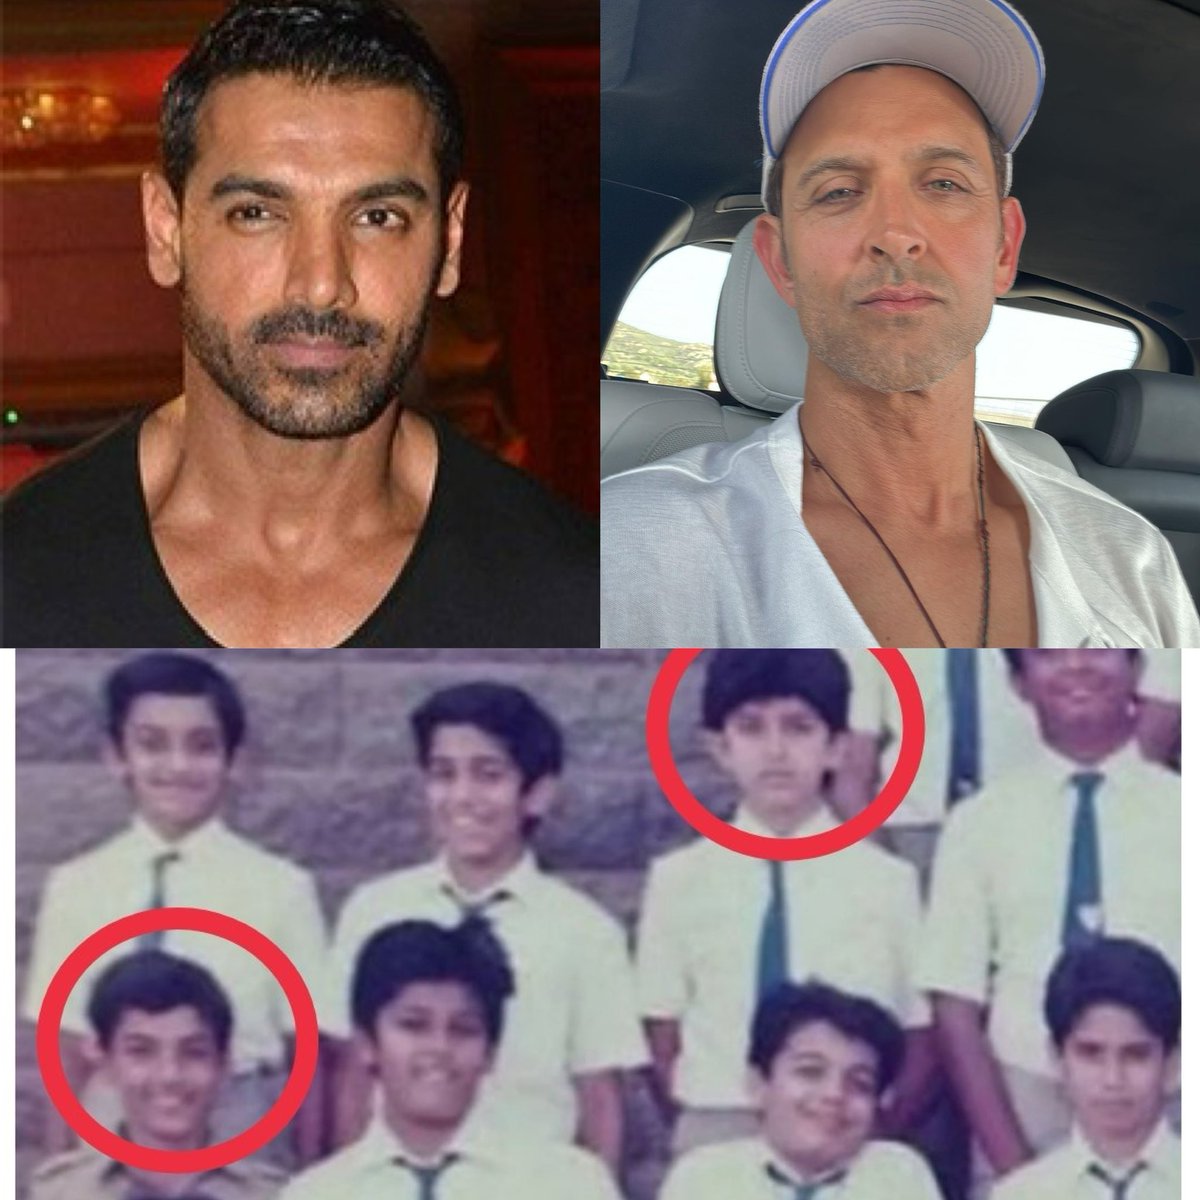 Major major throwback 😍
Did you know @iHrithik and @TheJohnAbraham were in the same school!

The popular actors went to Bombay Scottish School in Mumbai, checkout their picture!

#HrithikRoshan #JohnAbraham #Bollywood #Throwback